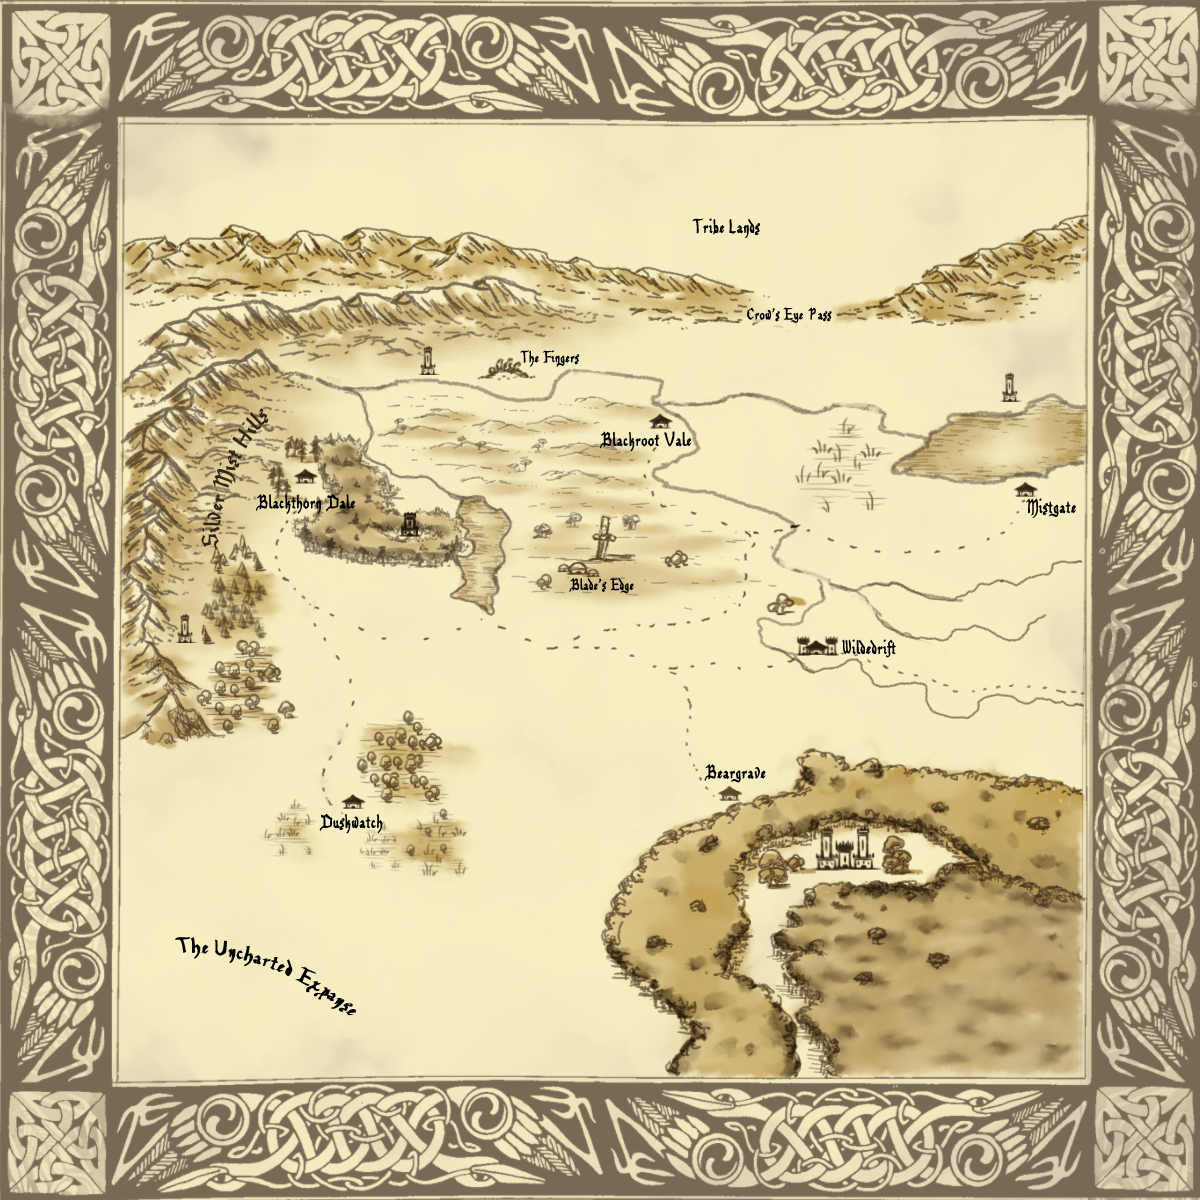 Blackthorn Dale Hand-drawn Map